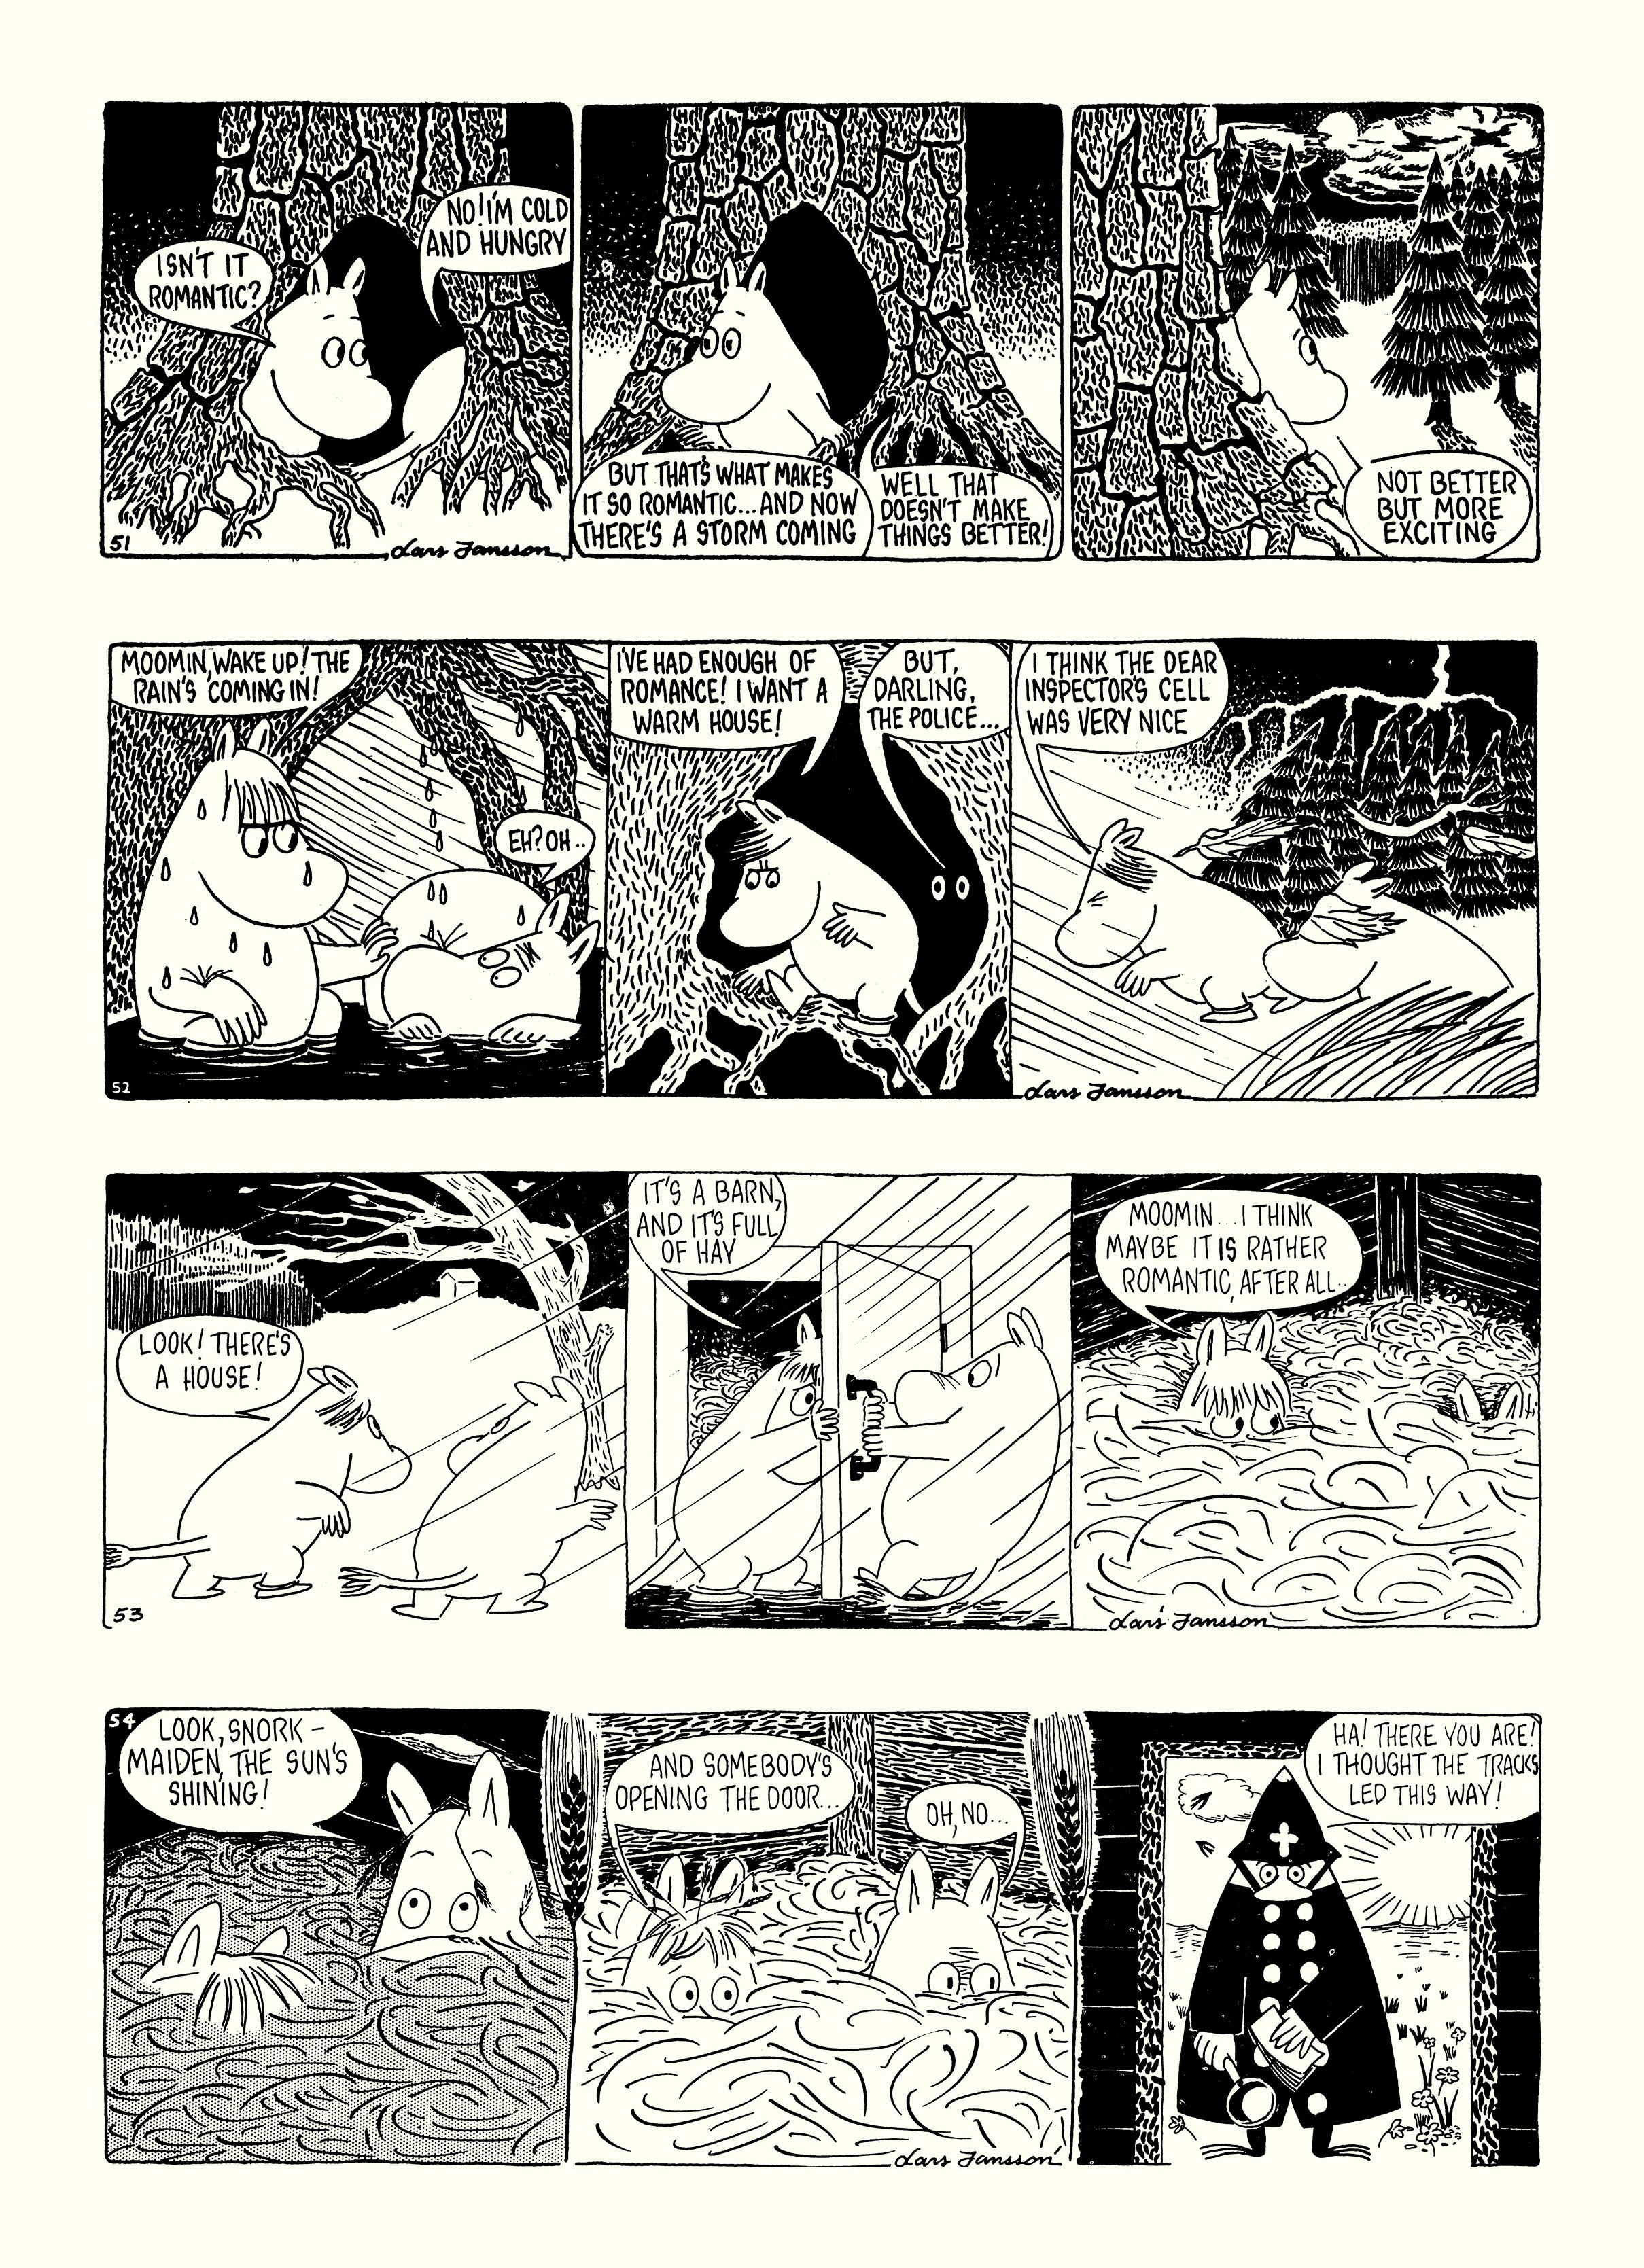 Read online Moomin: The Complete Lars Jansson Comic Strip comic -  Issue # TPB 6 - 19